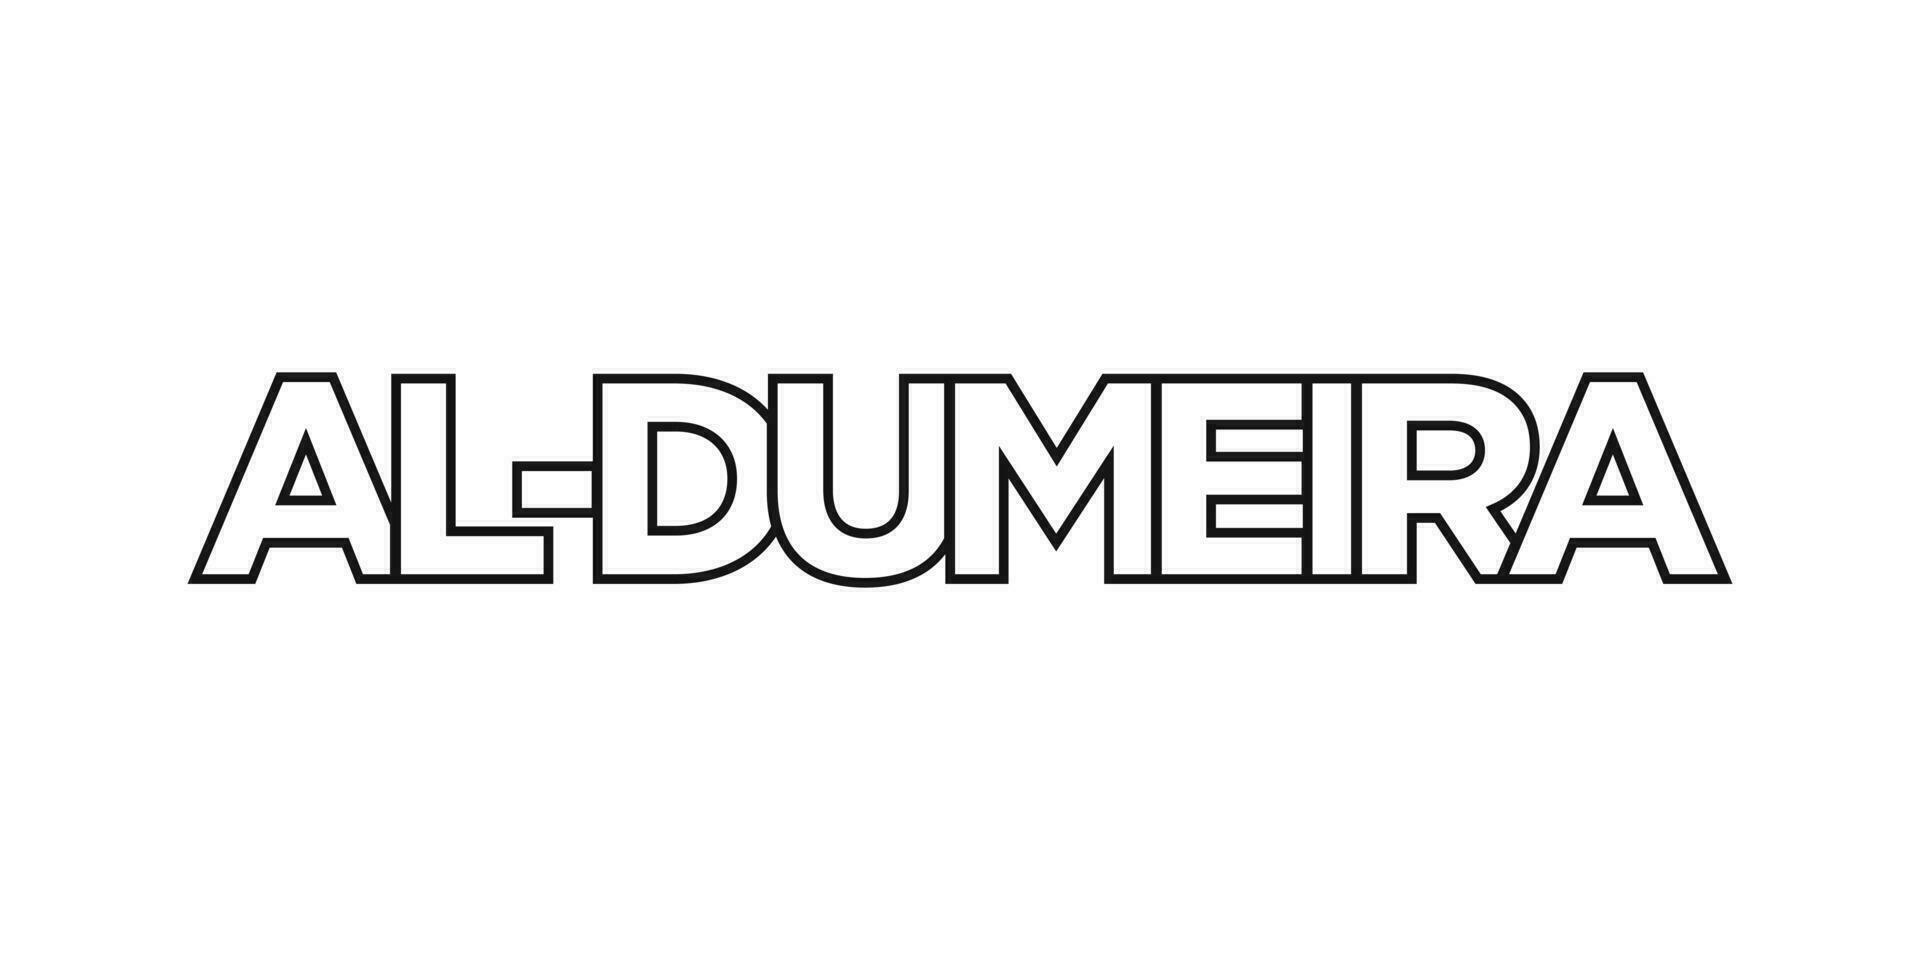 Al Dumeira in the Sudan emblem. The design features a geometric style, vector illustration with bold typography in a modern font. The graphic slogan lettering.